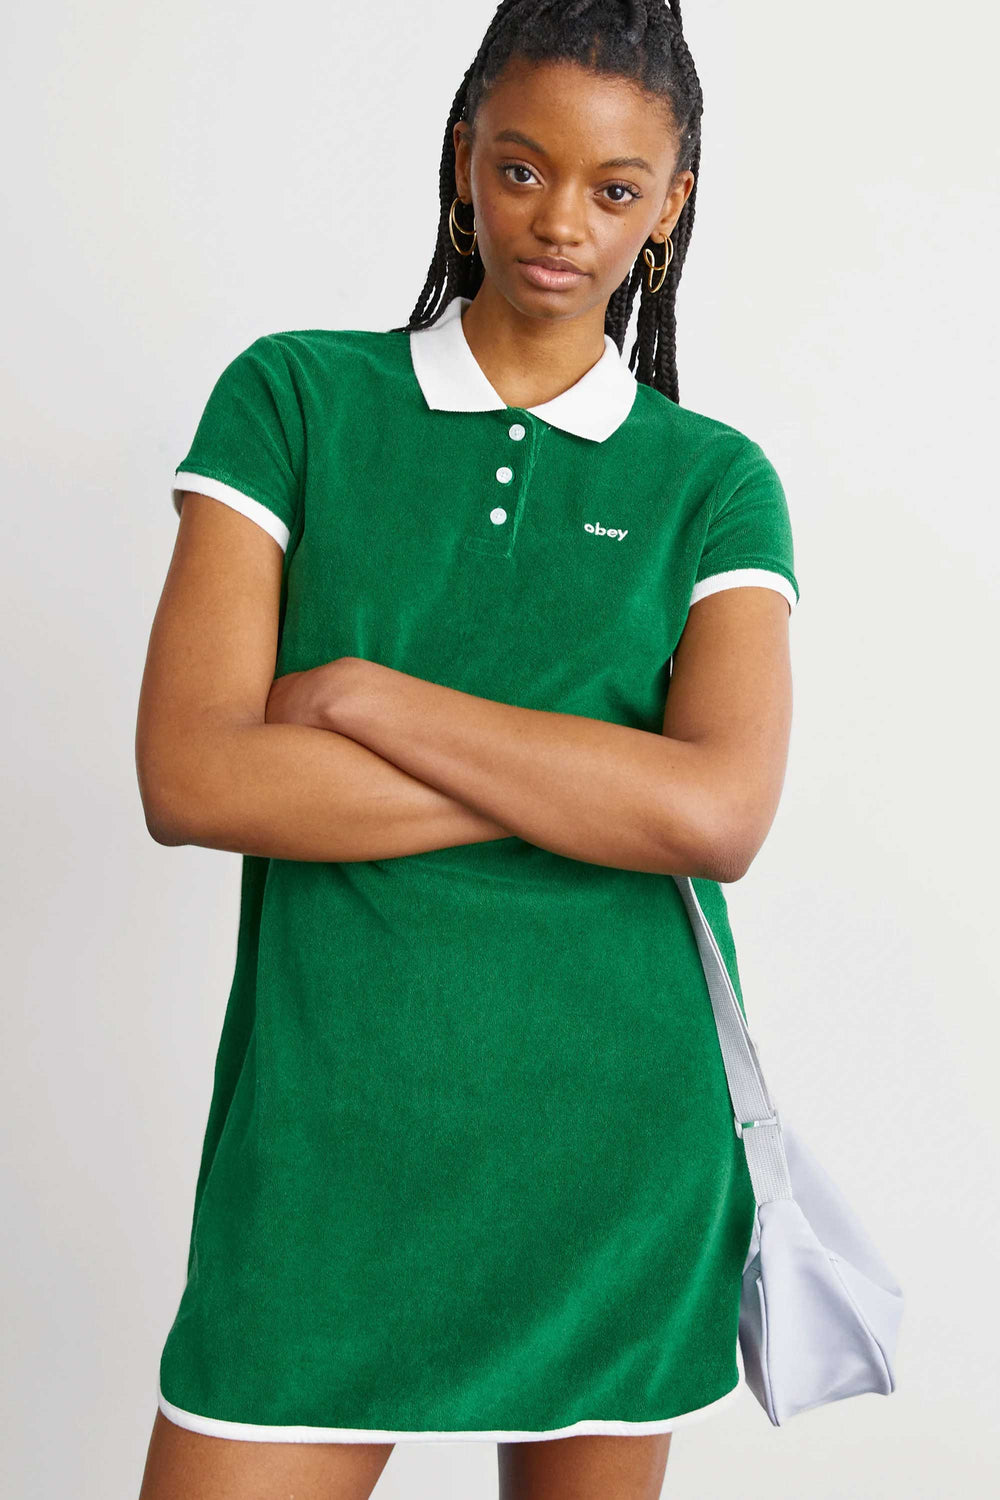 Pukas-Surf-Shop-obey-clare-polo-dress-green